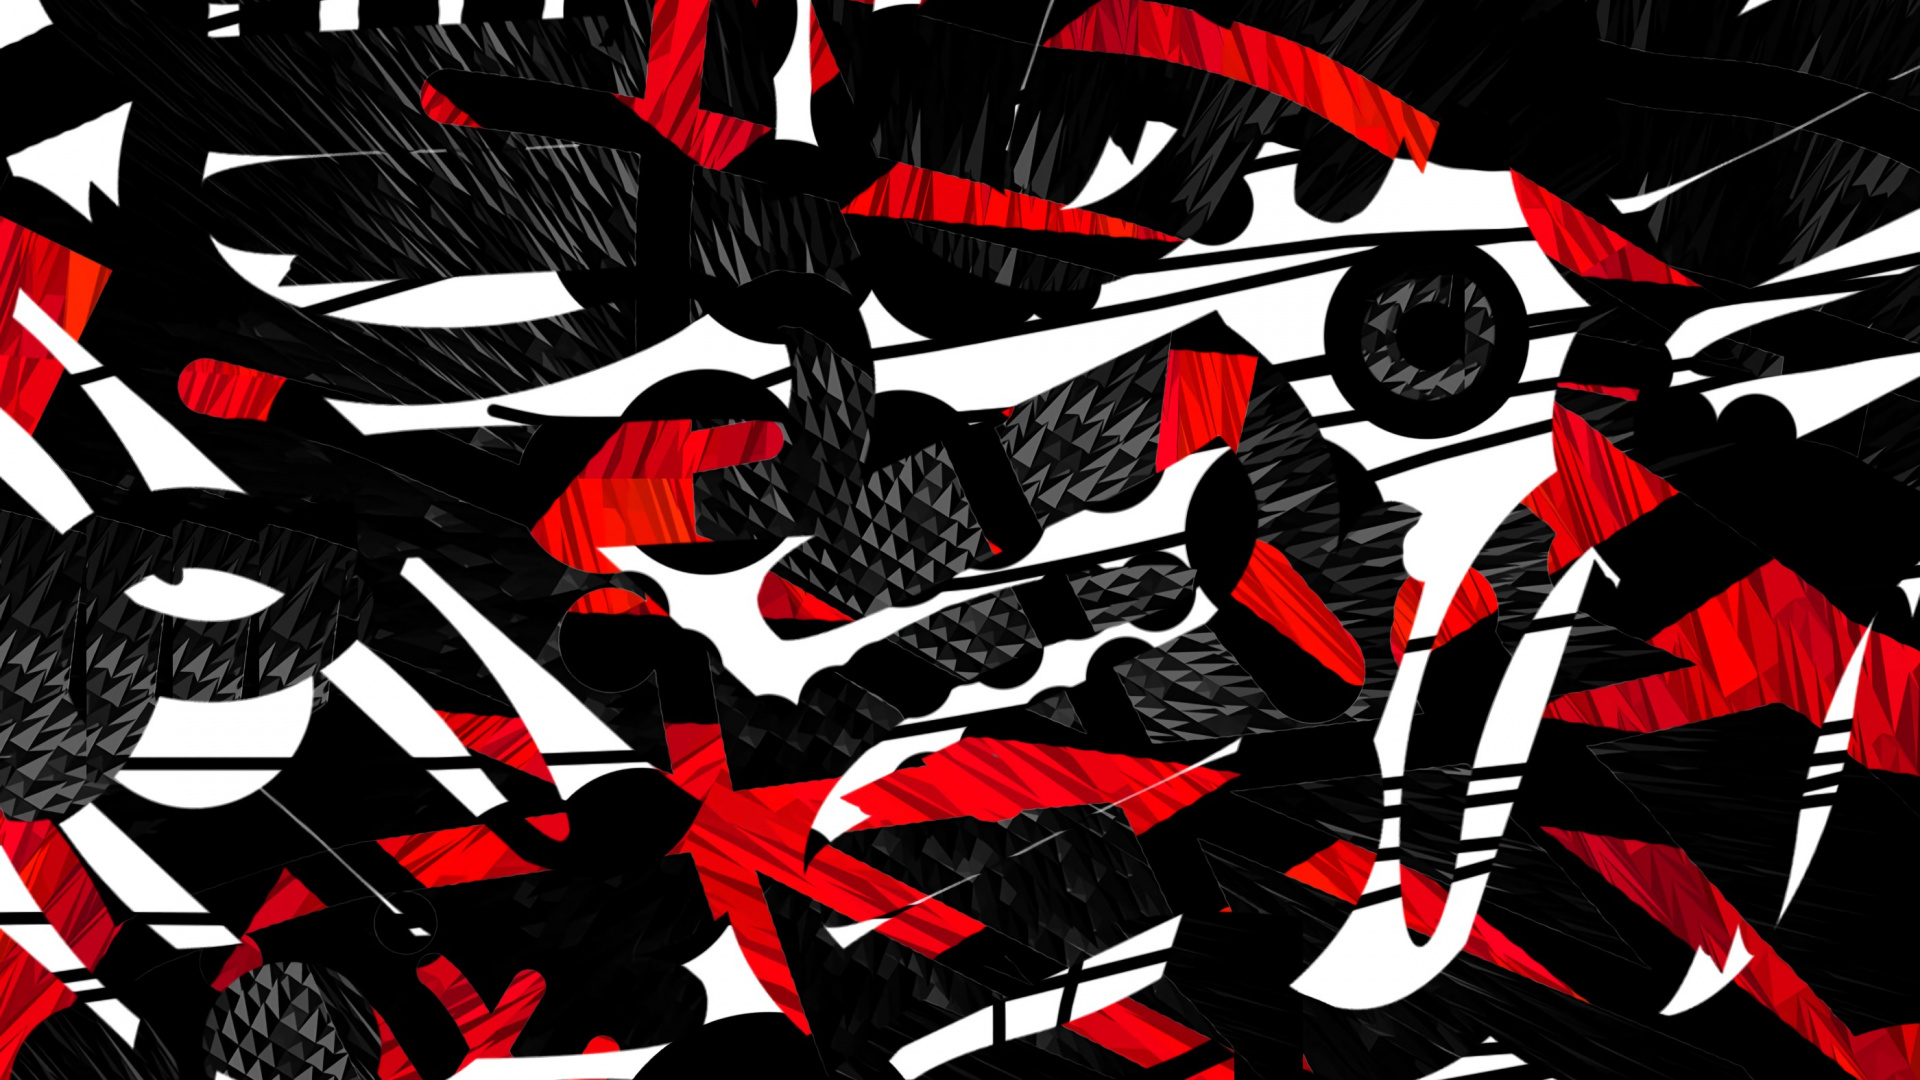 Black White and Red Abstract Painting. Wallpaper in 1920x1080 Resolution